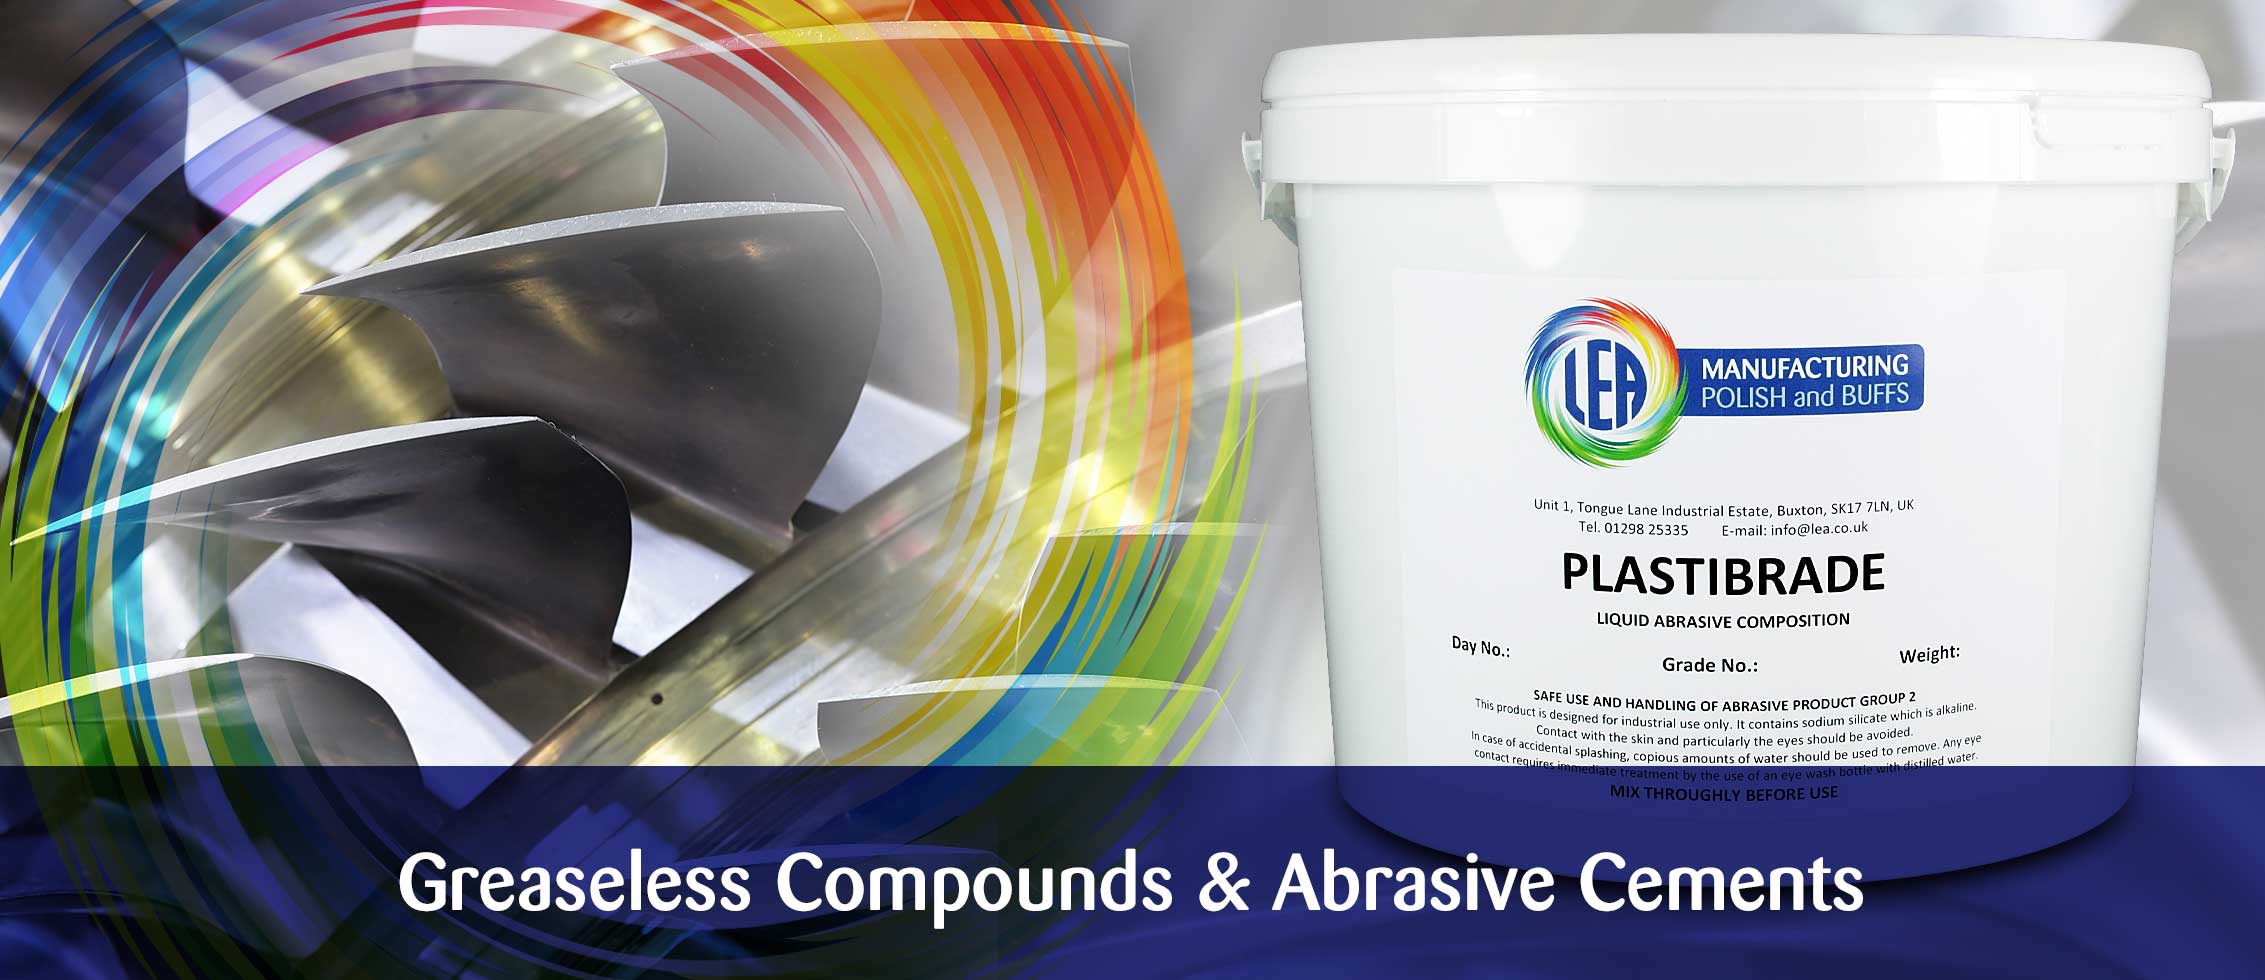 Greaseless Compounds and Abrasive Cements